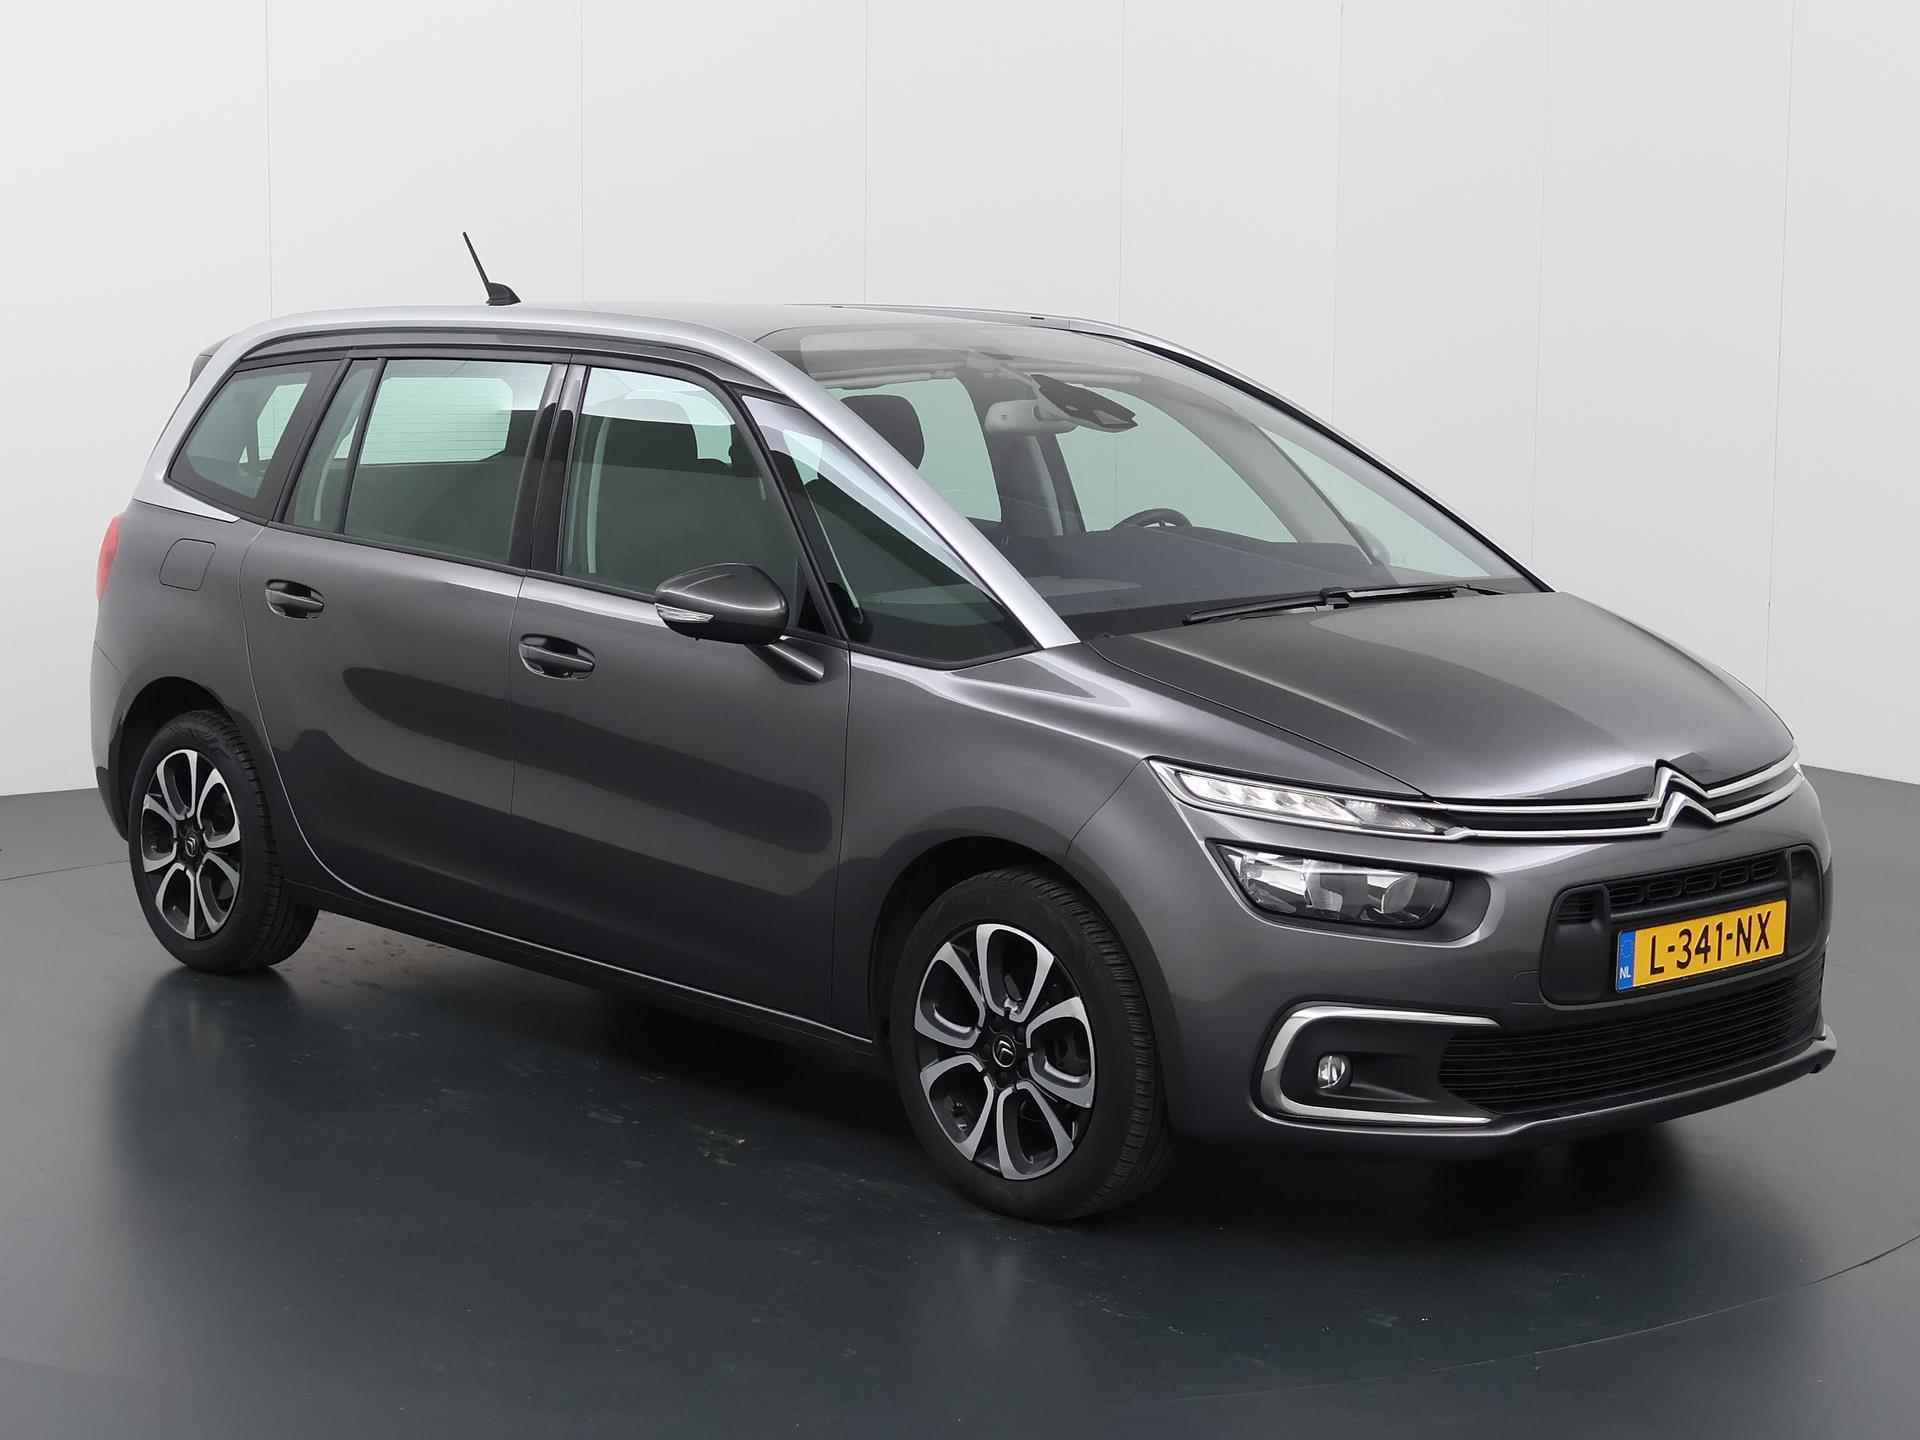 Citroen Grand C4 SpaceTourer 1.2 PureTech Business | 7 Persoons | Automaat | Navigatiesysteem | Achteruitrijcamera | Cruise Control | Climate Control | Apple Carplay/Android Auto | - 24/36